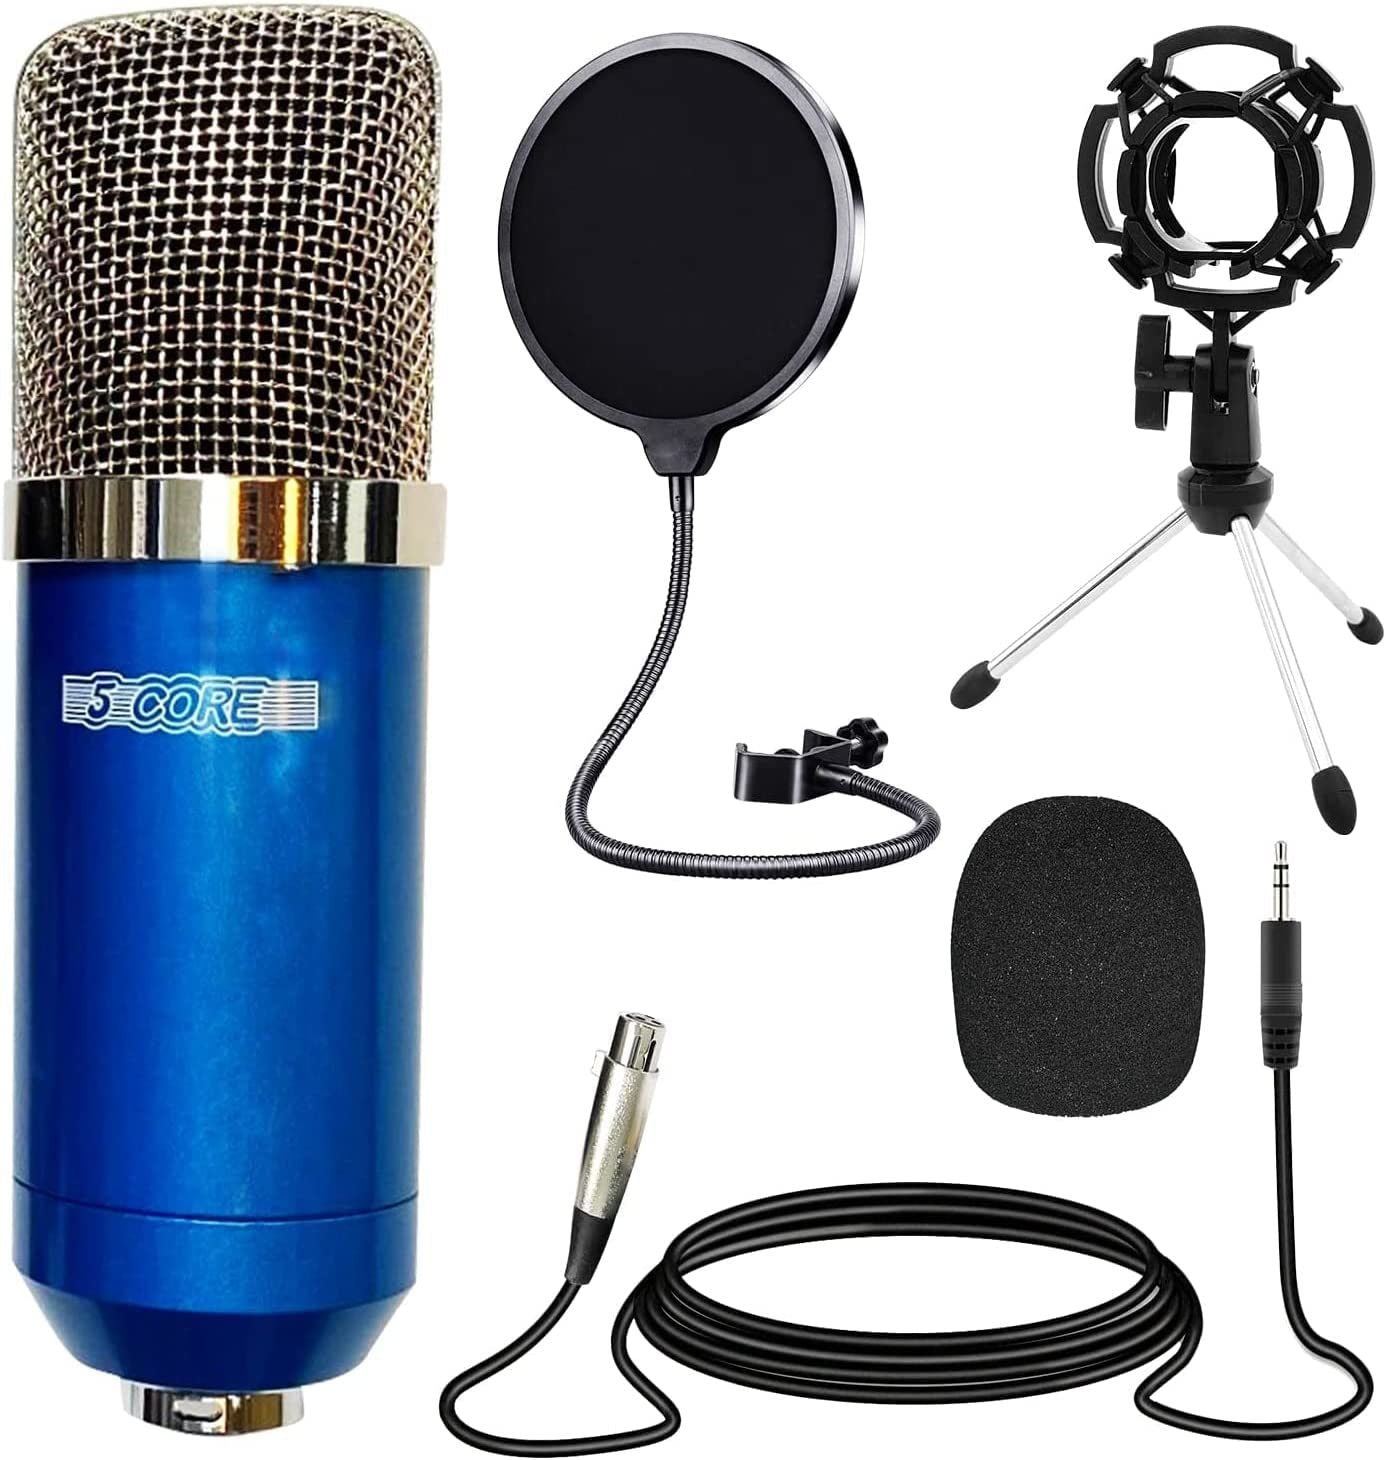 LazyPro™ XLR-5 Microphone Condenser Mic for Computer Gaming, Podcast & Tripod Stand Kit for Streaming 5 Core RM 7 BLU